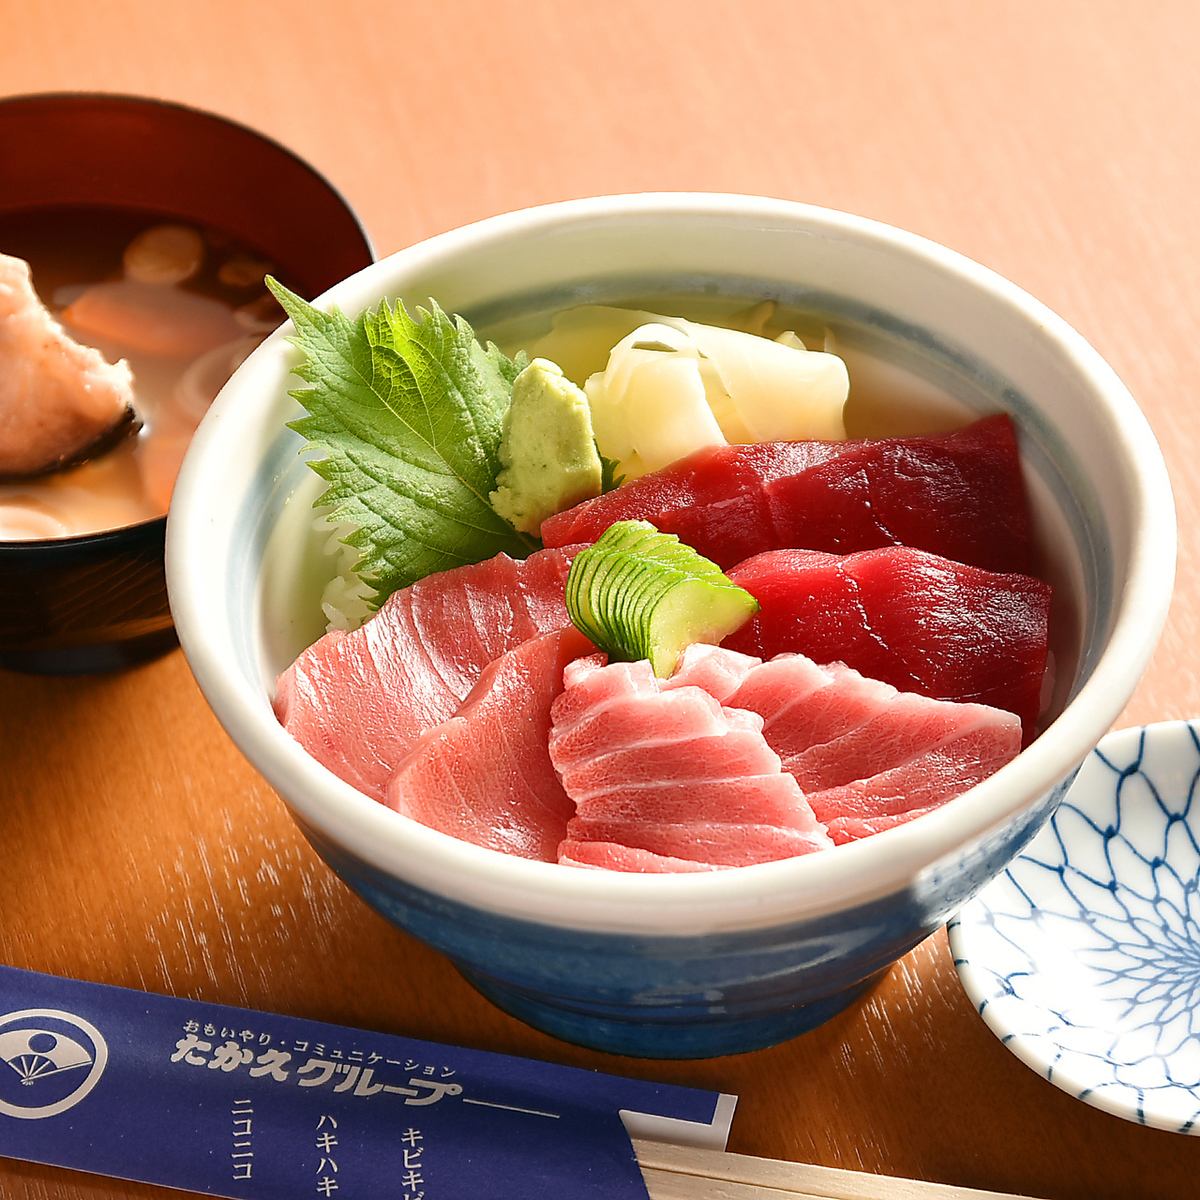 Various lunches, starting with seafood rice bowls, are available for 1,000 yen to 3,000 yen.